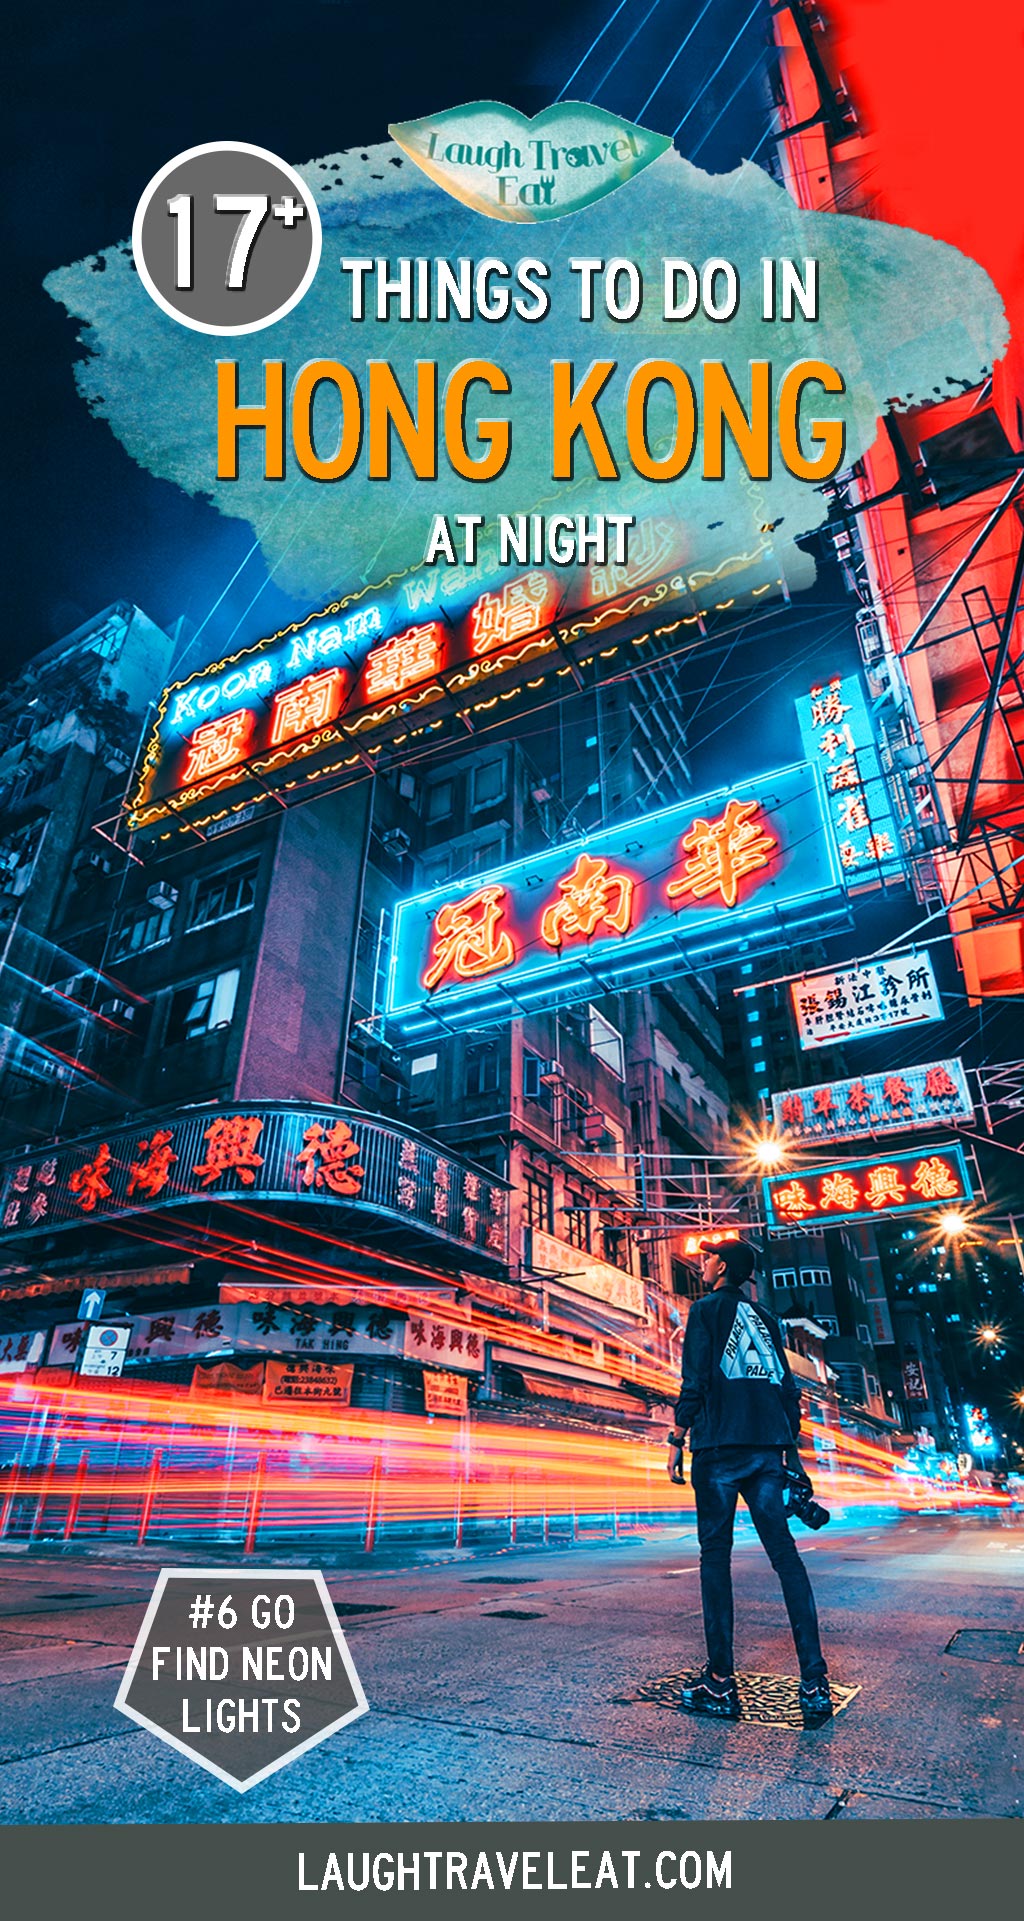 Hong Kong is famous for being a busy city so it should be no surprise that there are plenty to do at night. In fact, almost everything opens late and closes late, if not throughout the night. Whether you are looking to party it up or to venture out after the temperature has cool down, here are some top things to do at night in Hong Kong: #HongKong